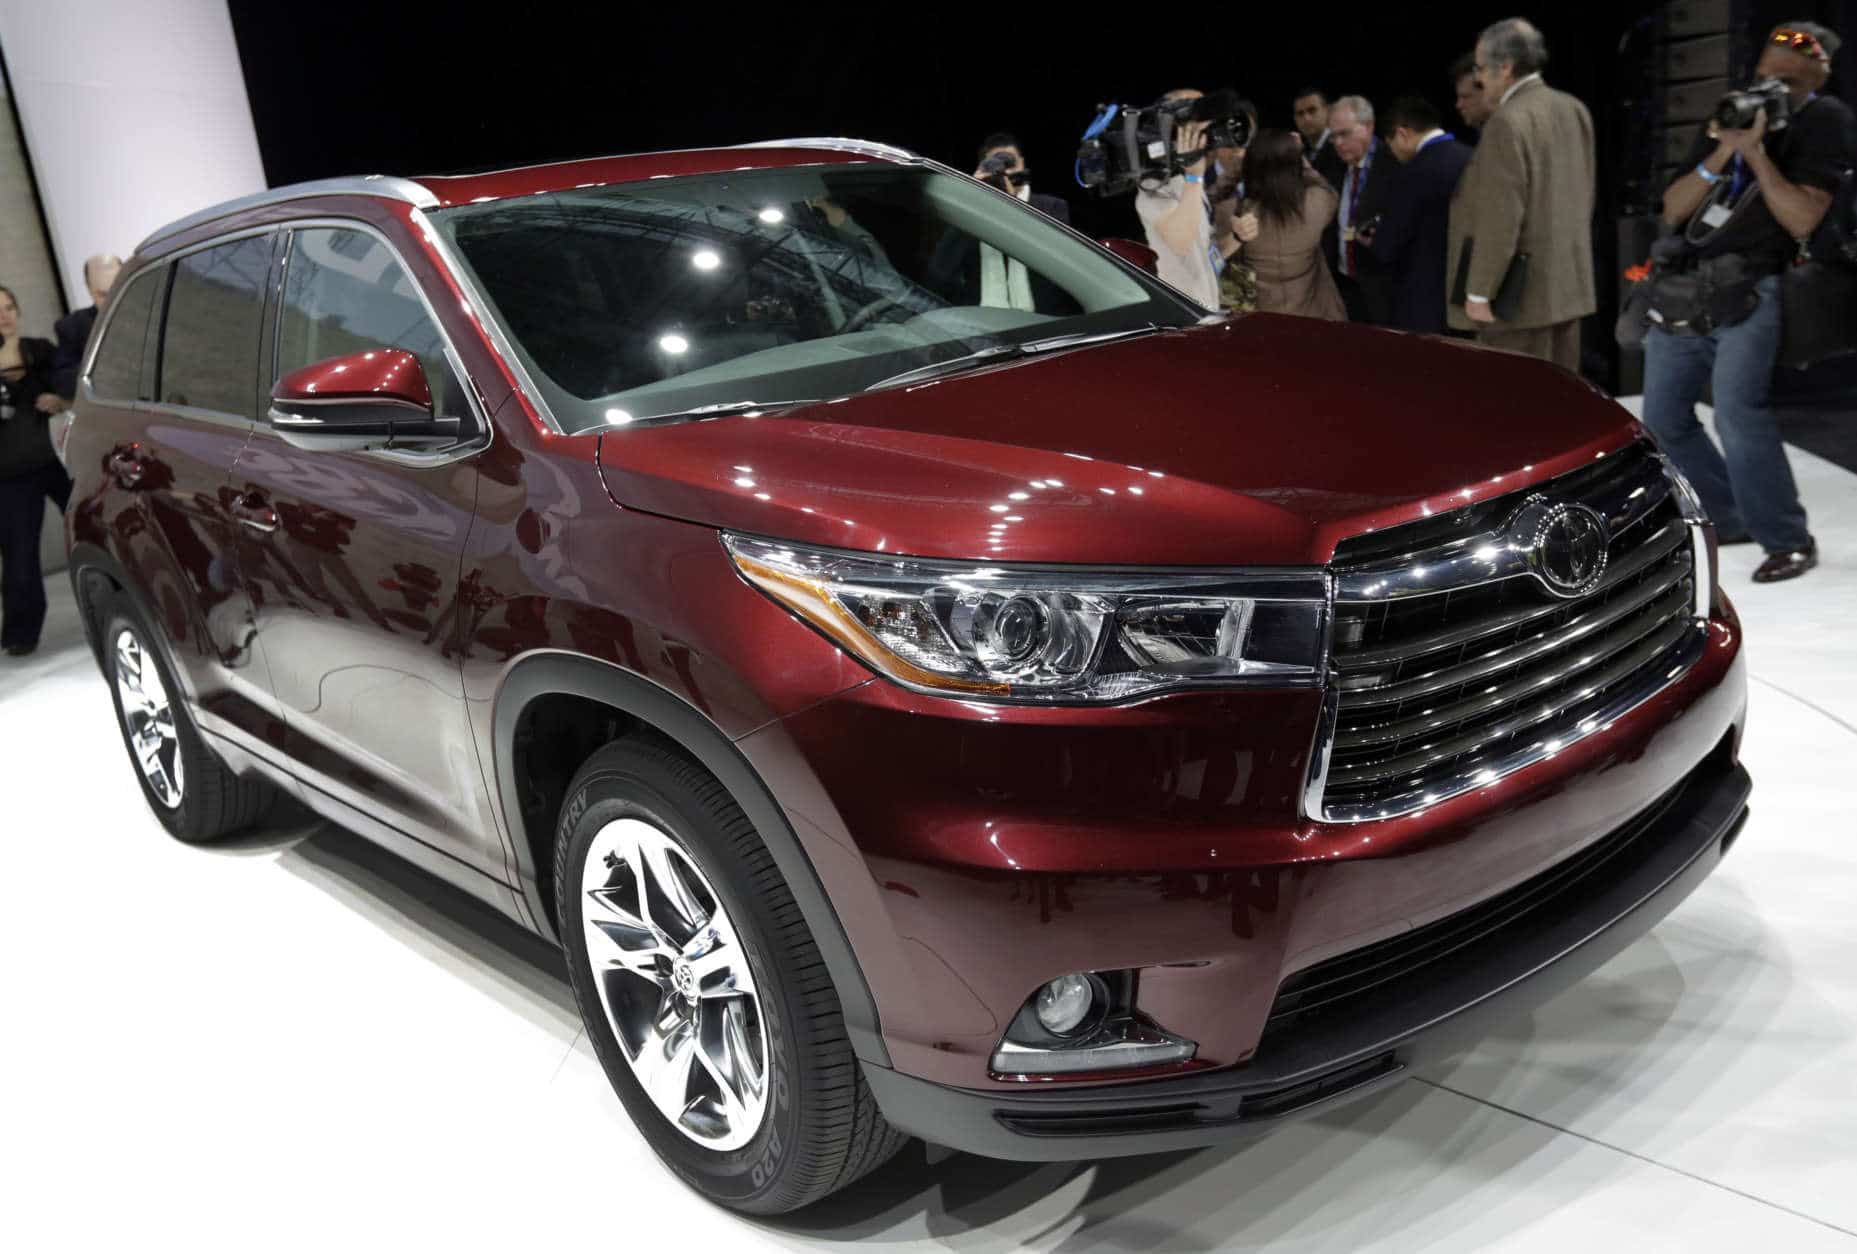 The 2014 Toyota Highlander is presented at the New York International Auto Show, in New York's Javits Center,  Wednesday, March 27, 2013. (AP Photo/Richard Drew)